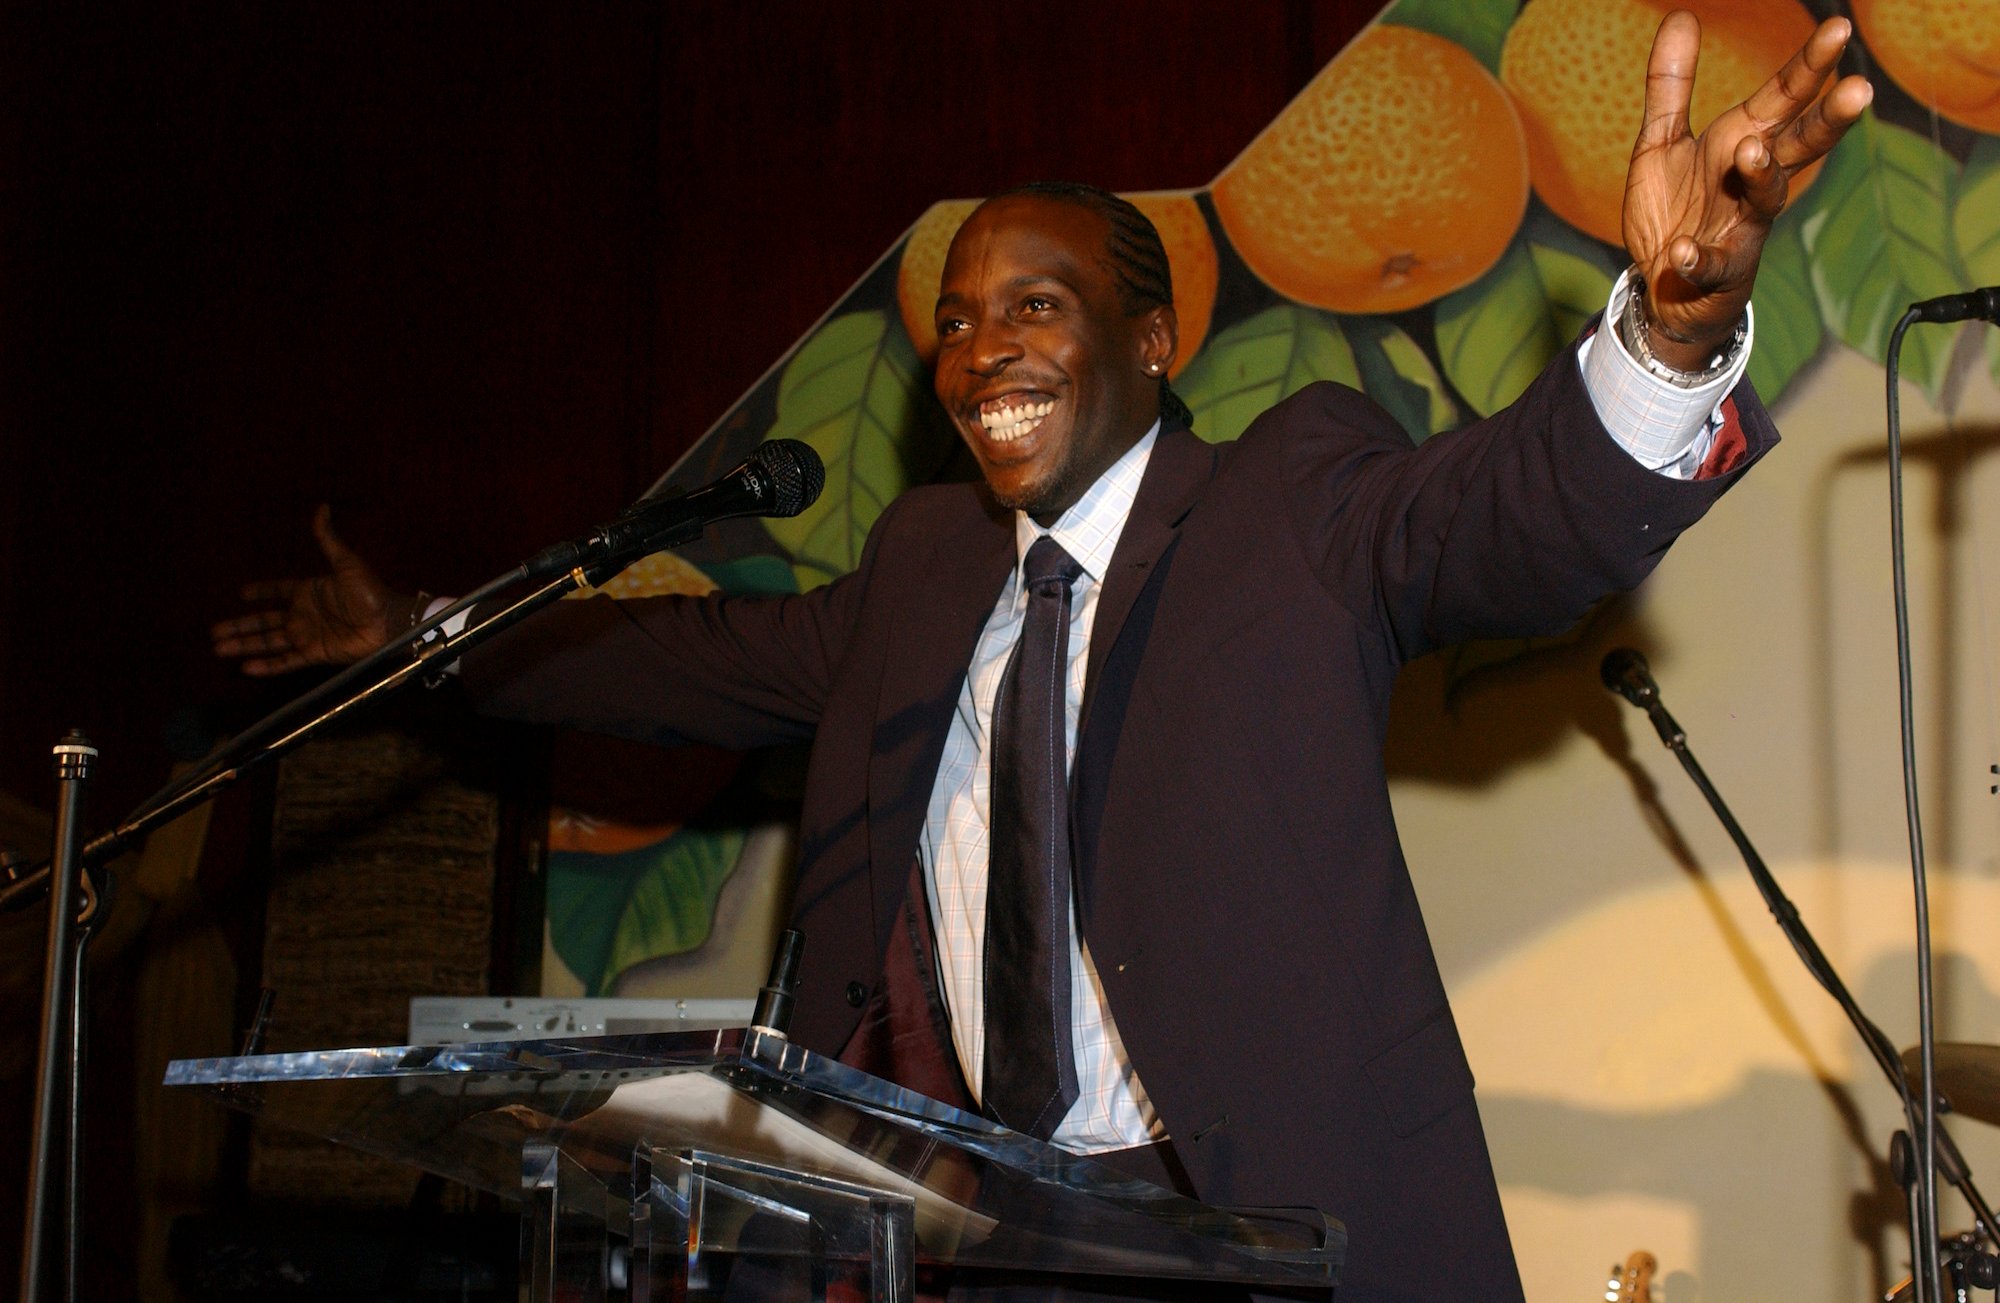 Michael K. Williams, the actor playing Omar on 'The Wire,' smiling with his hands outstretched at a podium